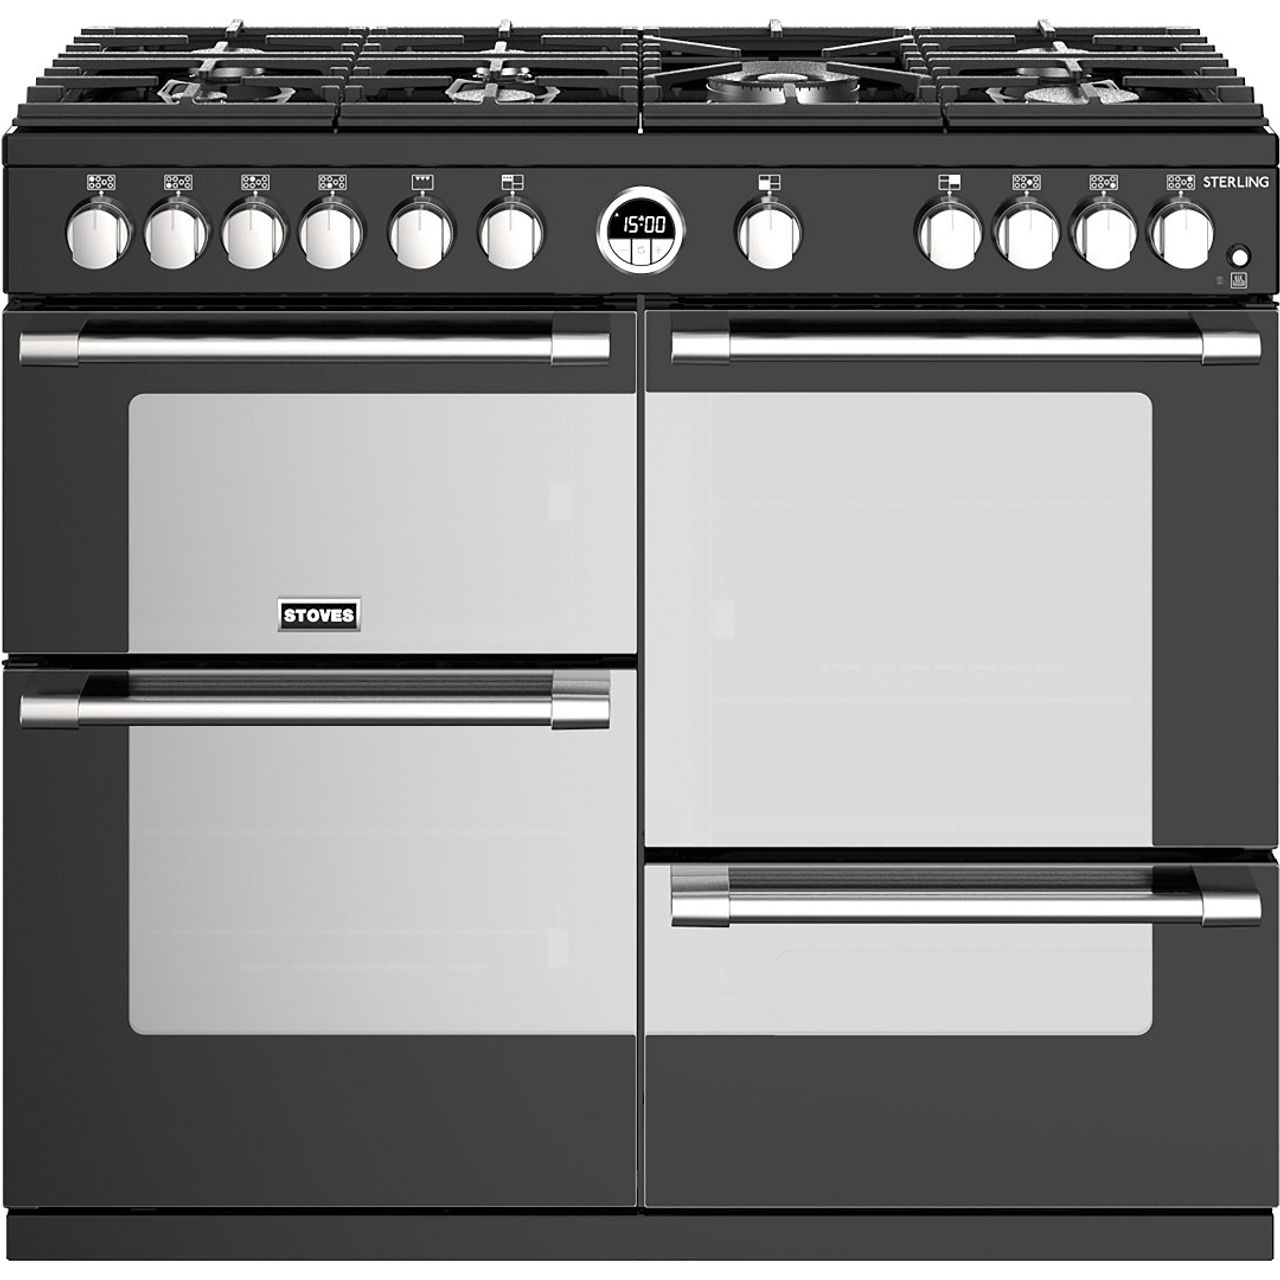 Stoves Sterling S1000G 100cm Gas Range Cooker with Electric Grill Review